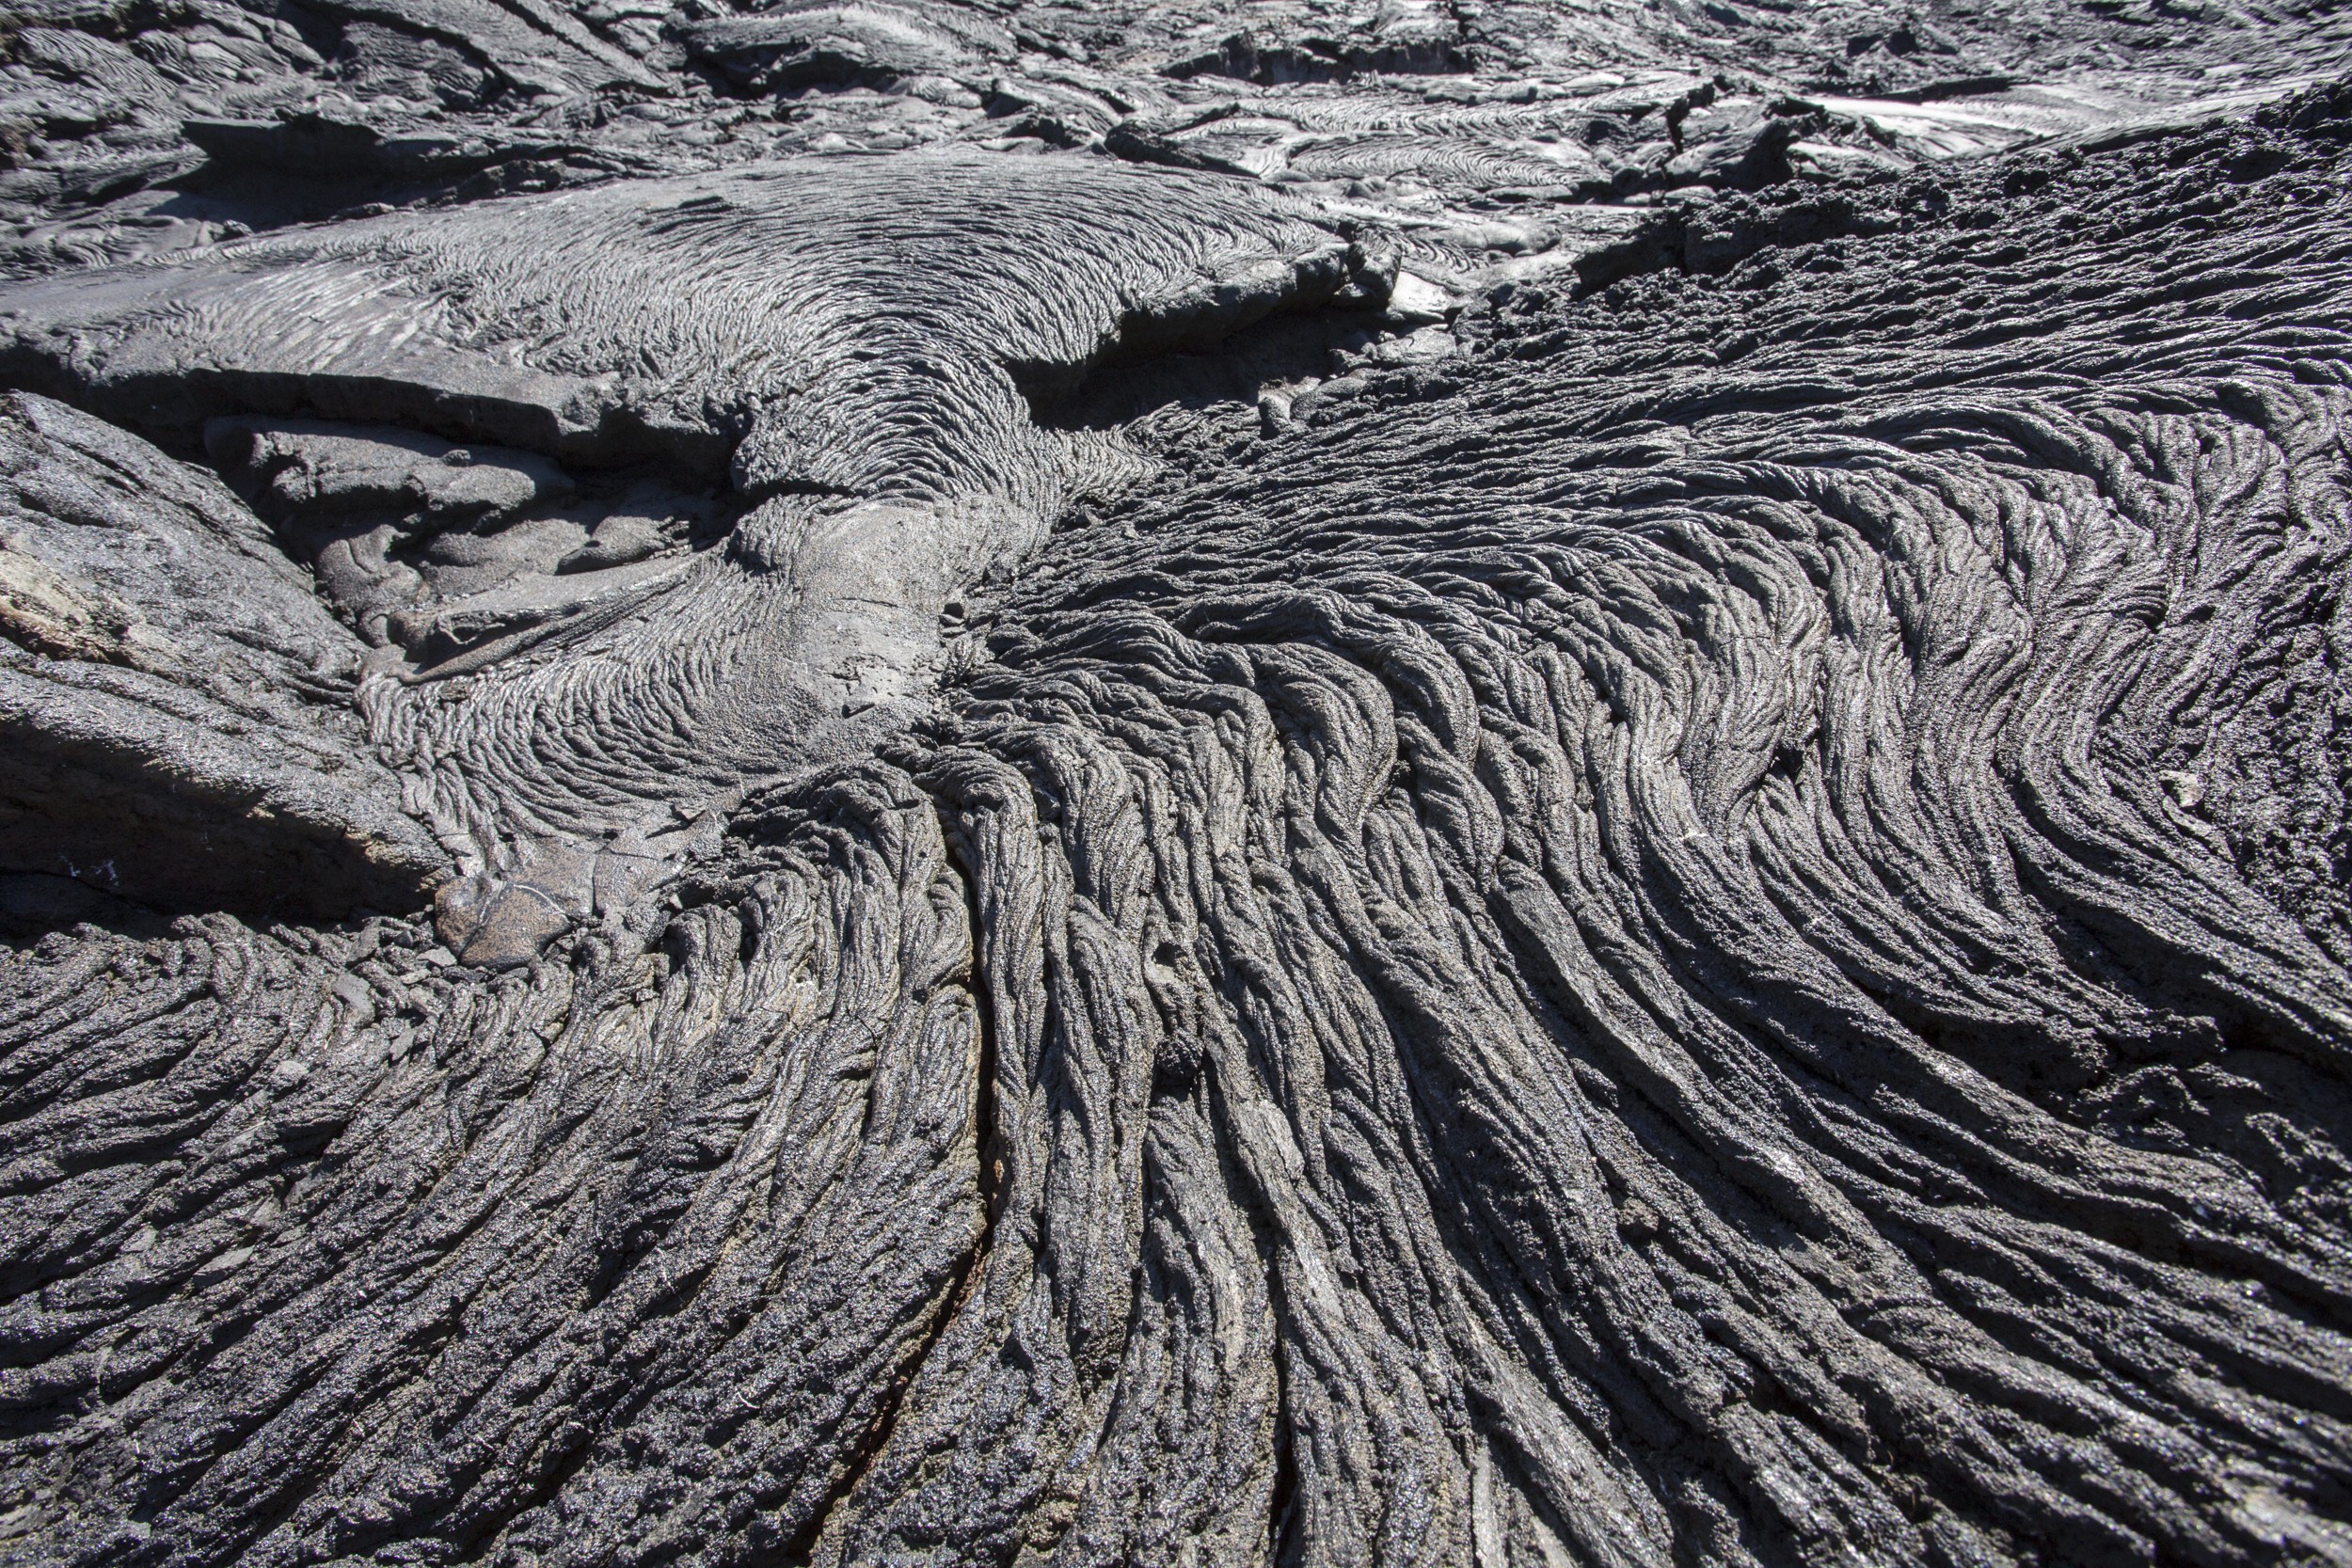 ‘Pahoehoe’ or ‘ropy’ lava.